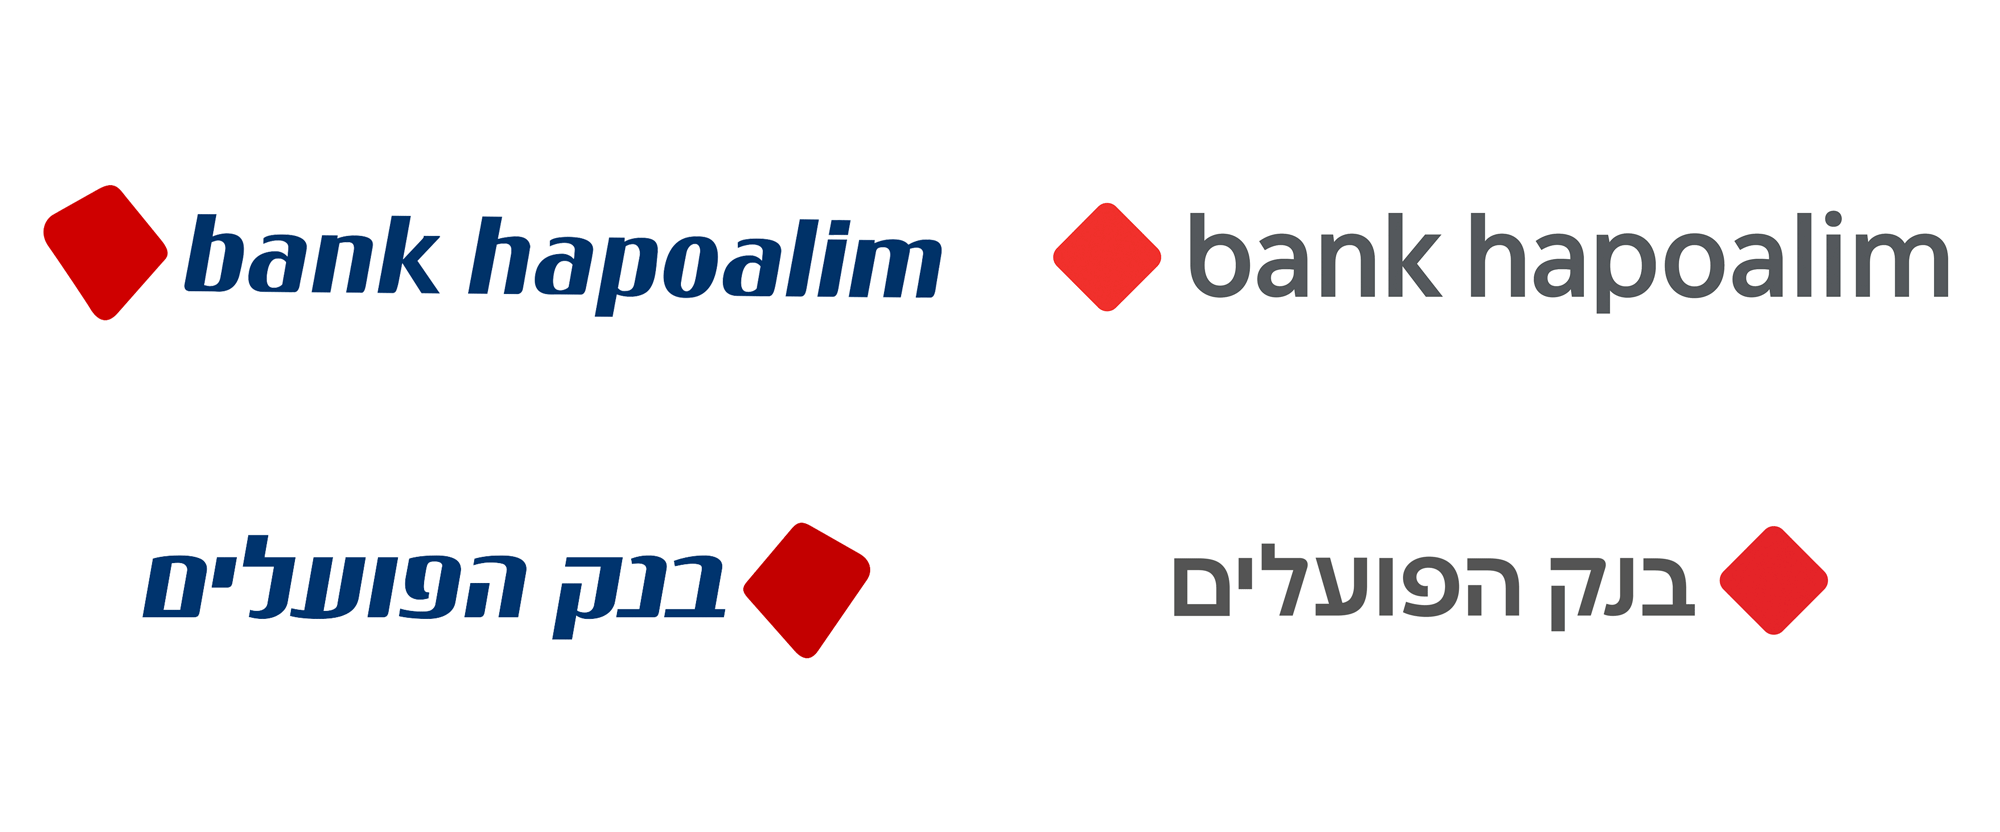 Bank Brand Logo - Brand New: New Logo and Identity for Bank Hapoalim